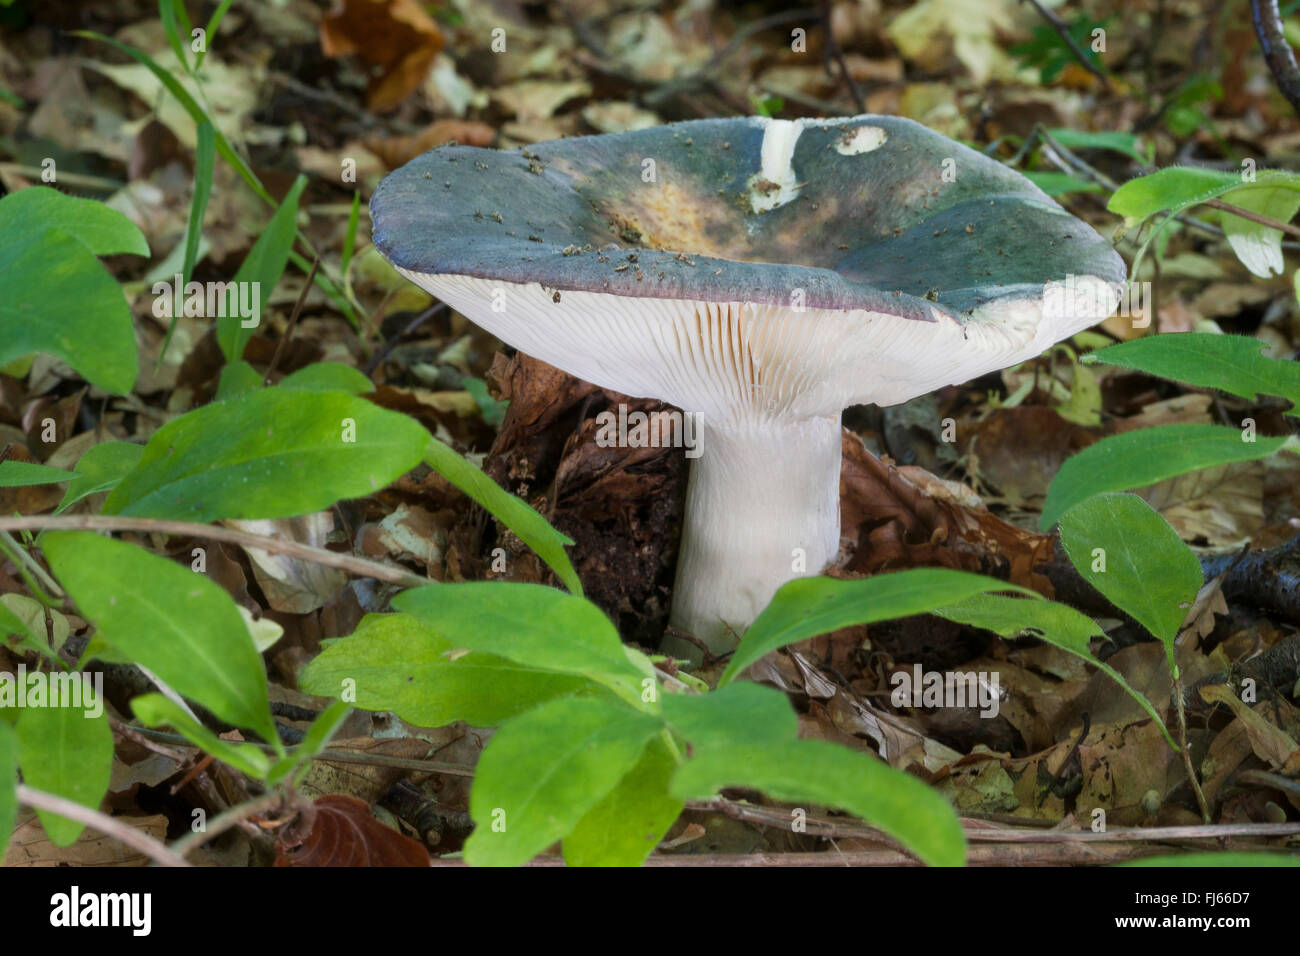 charcoal burner (Russula cyanoxantha), single fruiting body on the forest ground, edible mushroom, Germany Stock Photo